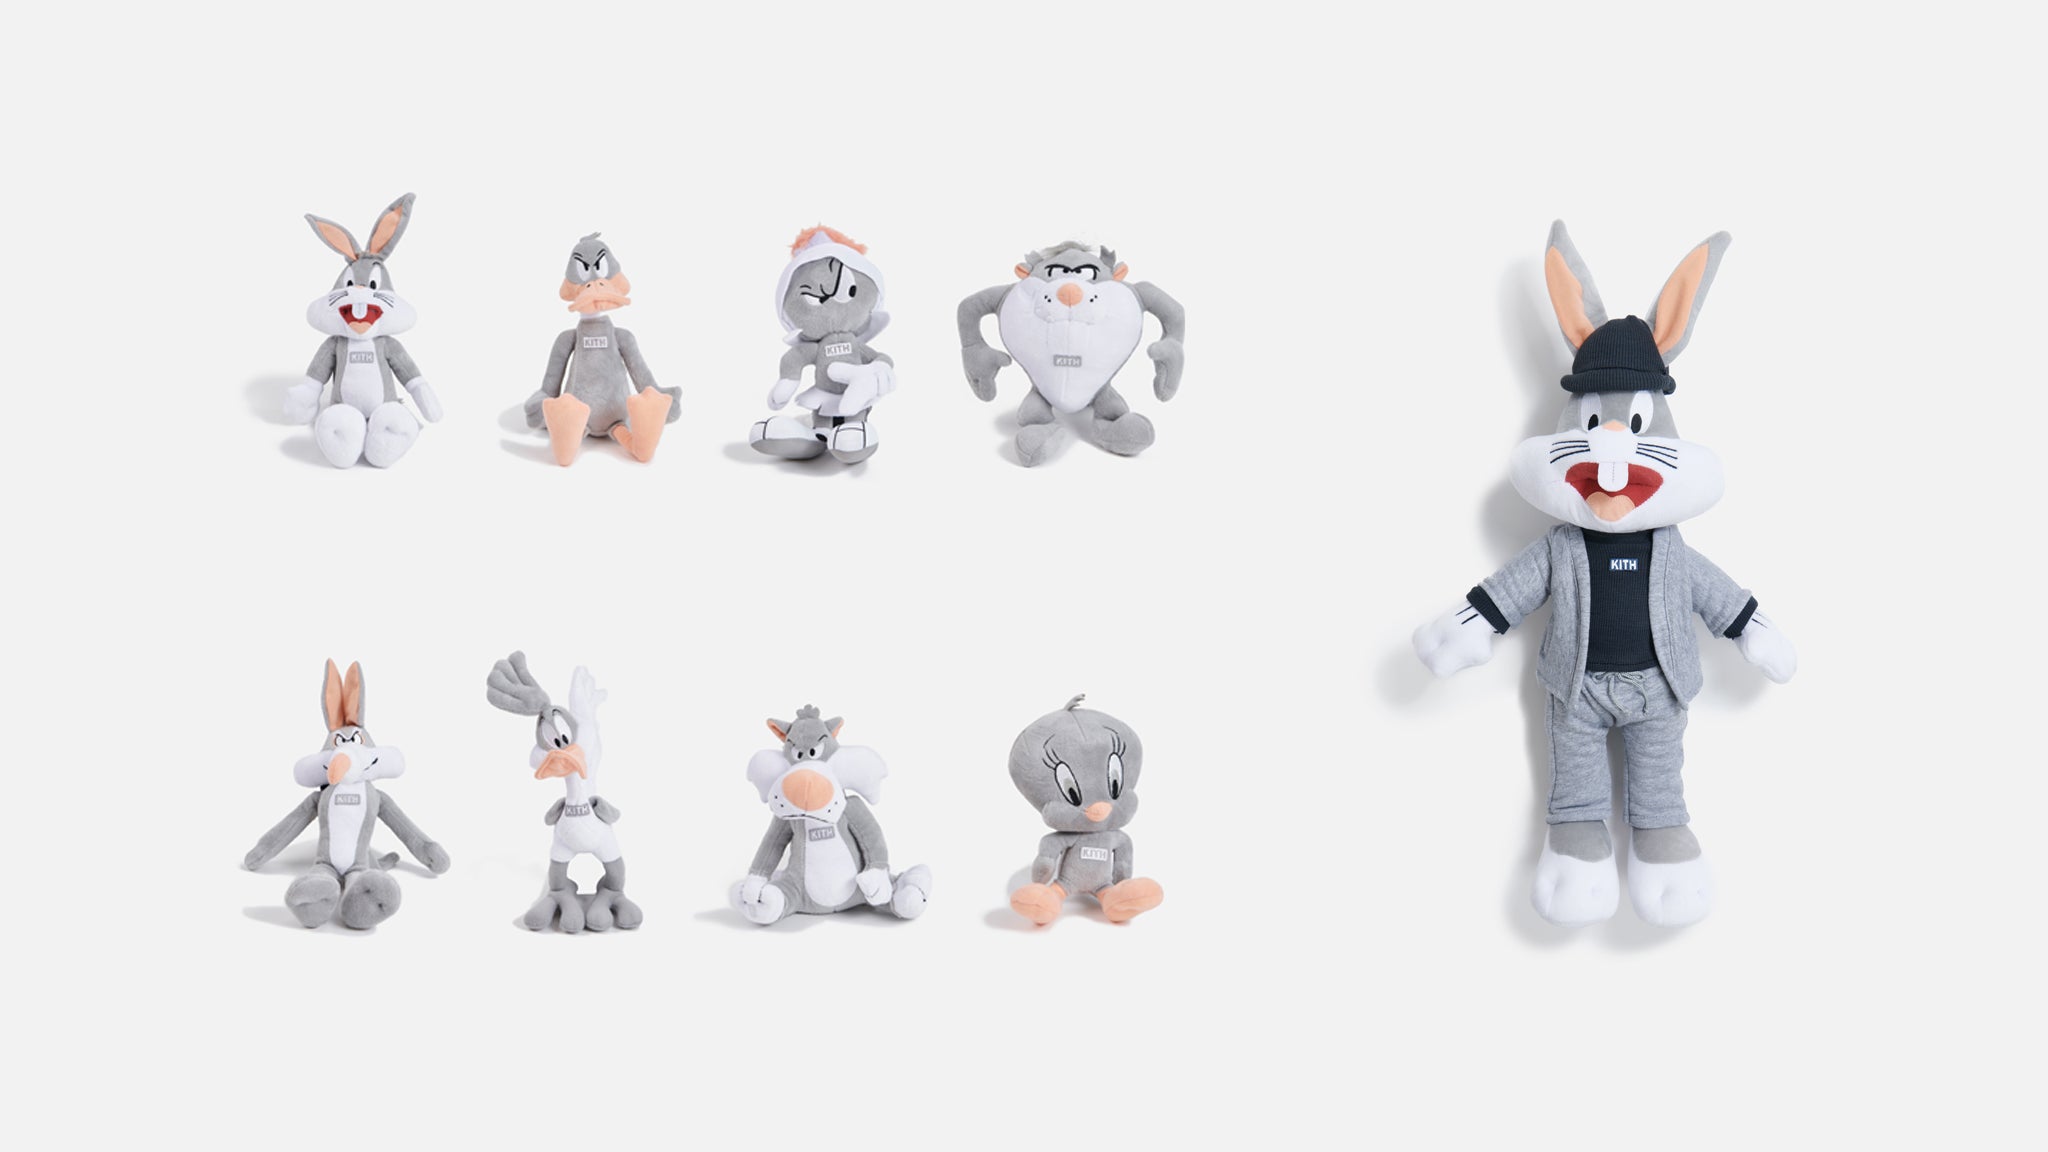 A Closer Look at Kith x Looney Tunes